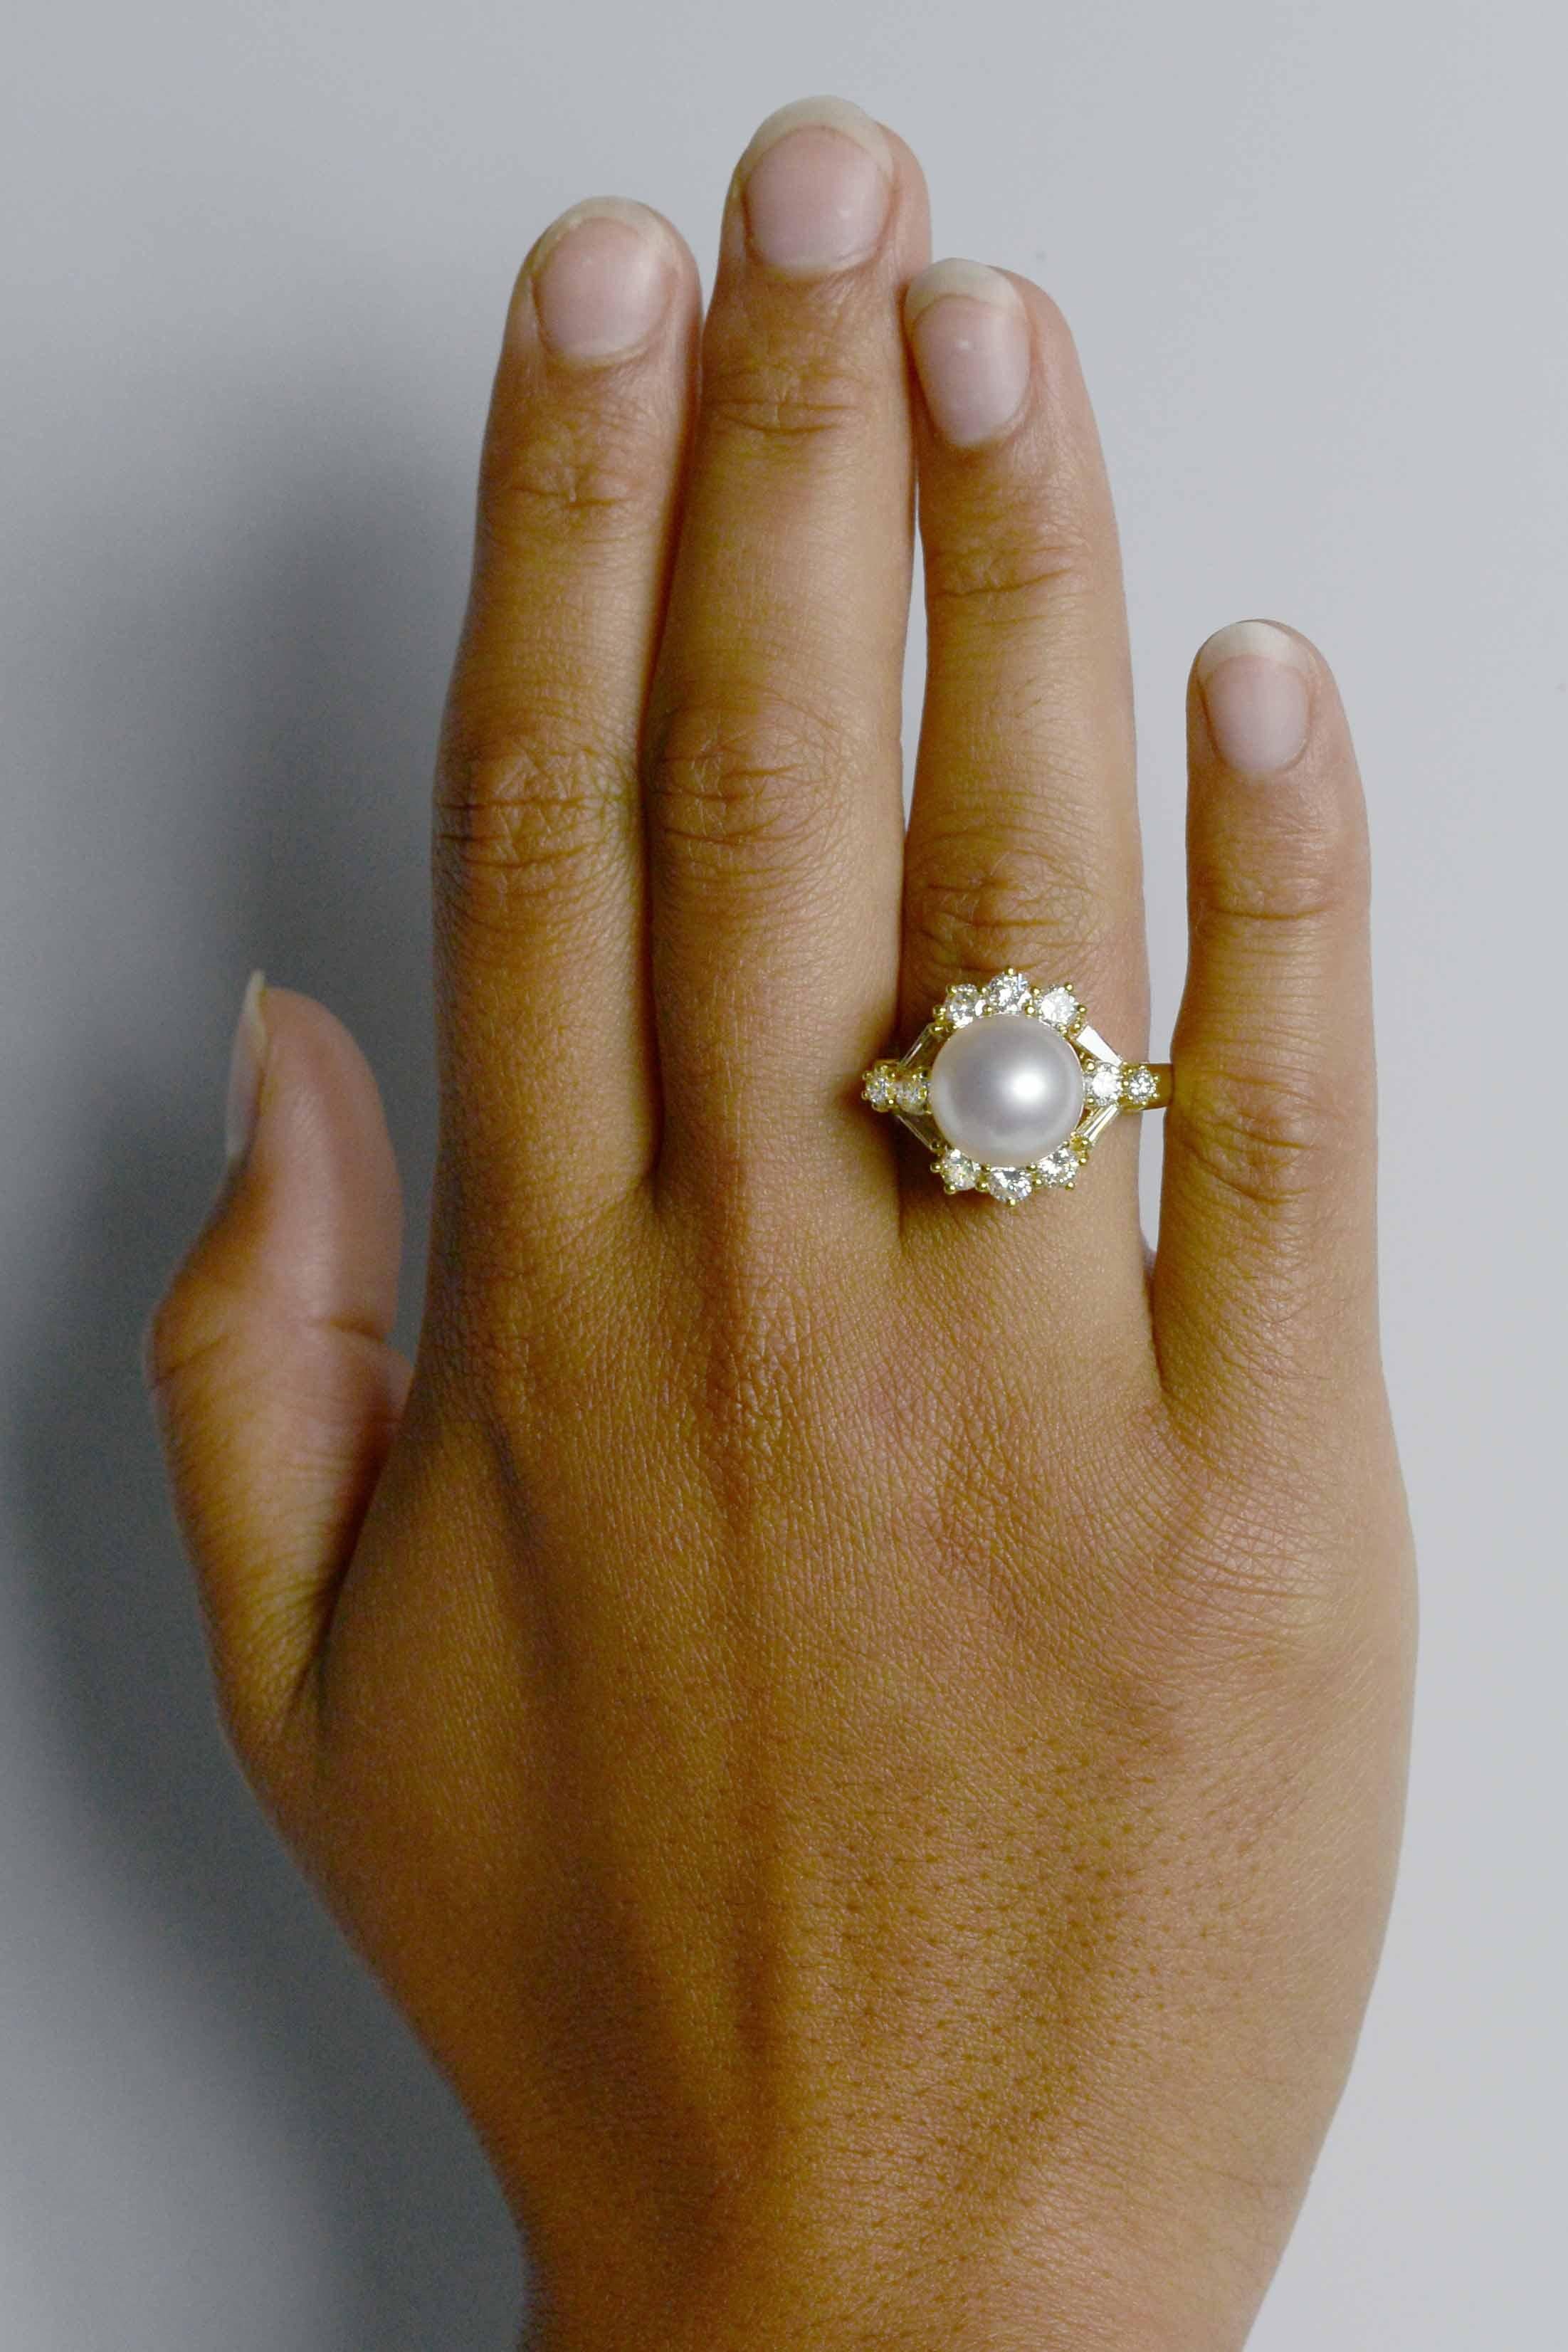 This amazing white South Sea pearl and diamond cocktail ring is centered by a rare, 11.4 mm perfectly round glowing dome of high luster with a mesmerizing rose overtone. The flawless complexion mirrors the fire of the 14 diamonds arranged in a